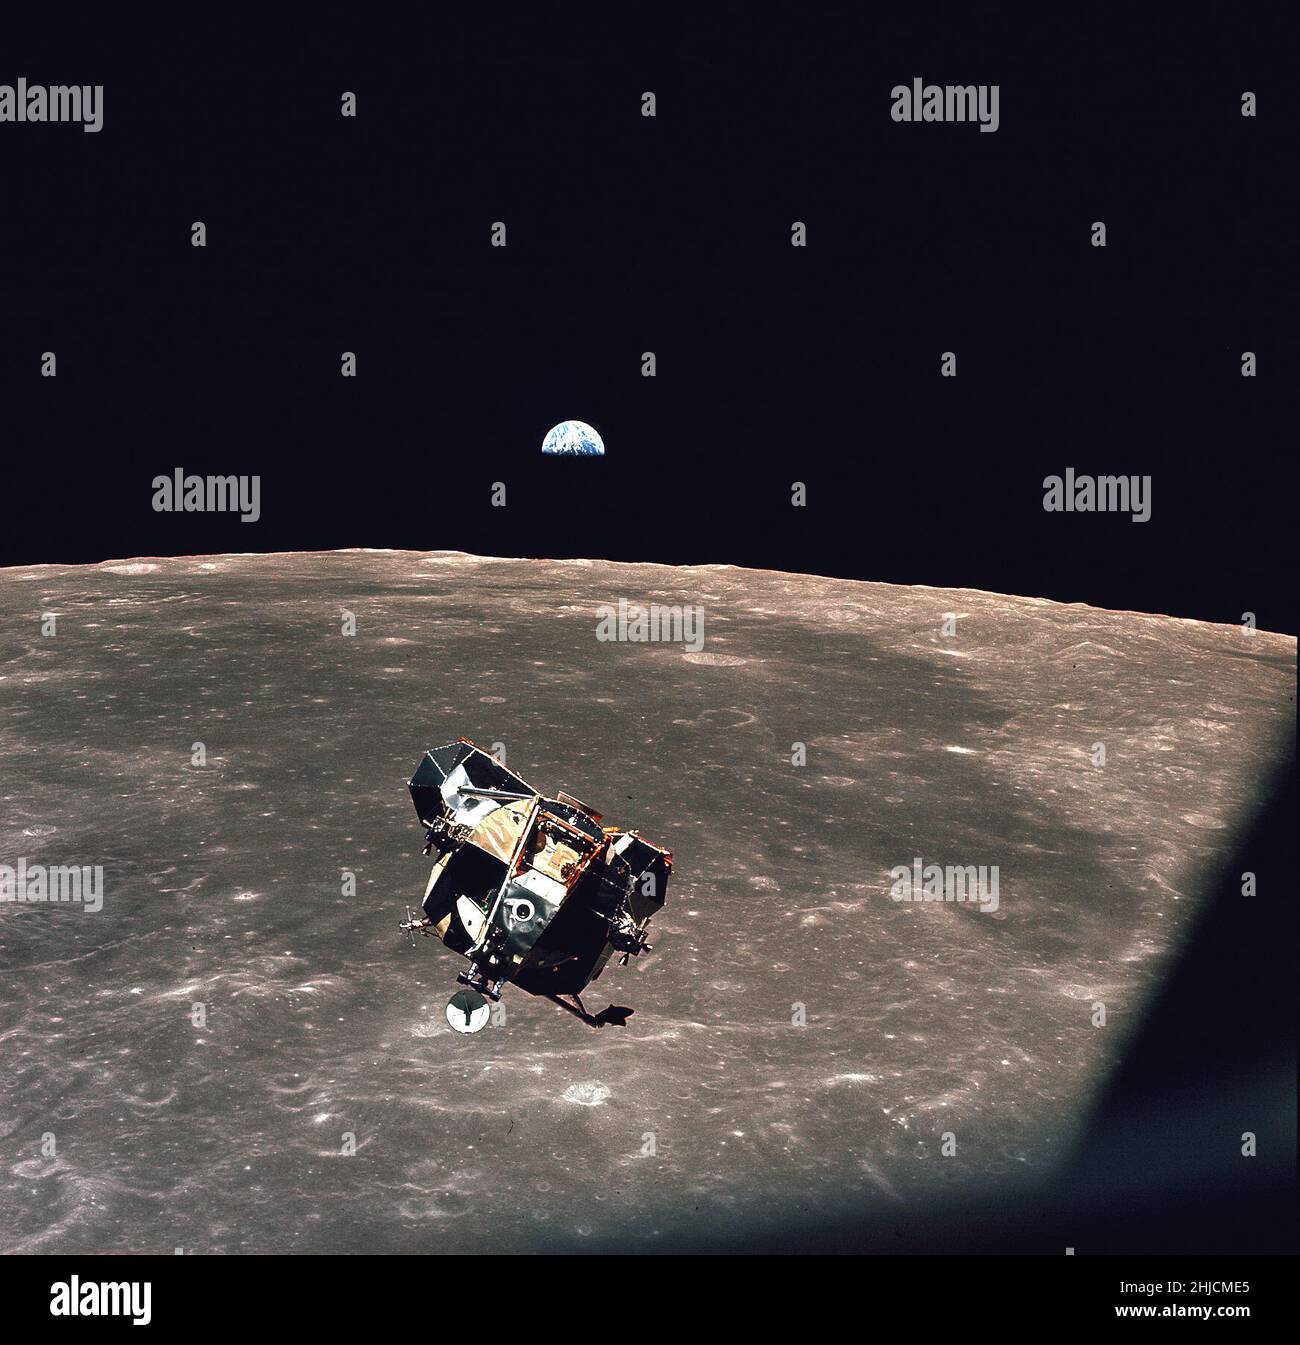 A view of the Apollo 11 lunar module 'Eagle' as it returned from the surface of the moon to dock with the command module 'Columbia'. A smooth mare area is visible on the Moon below and a half-illuminated Earth hangs over the horizon. The lunar module ascent stage was about 4 meters across. Command module pilot Michael Collins took this picture just before docking at 21:34:00 UT (5:34 p.m. EDT) 21 July 1969. Stock Photo